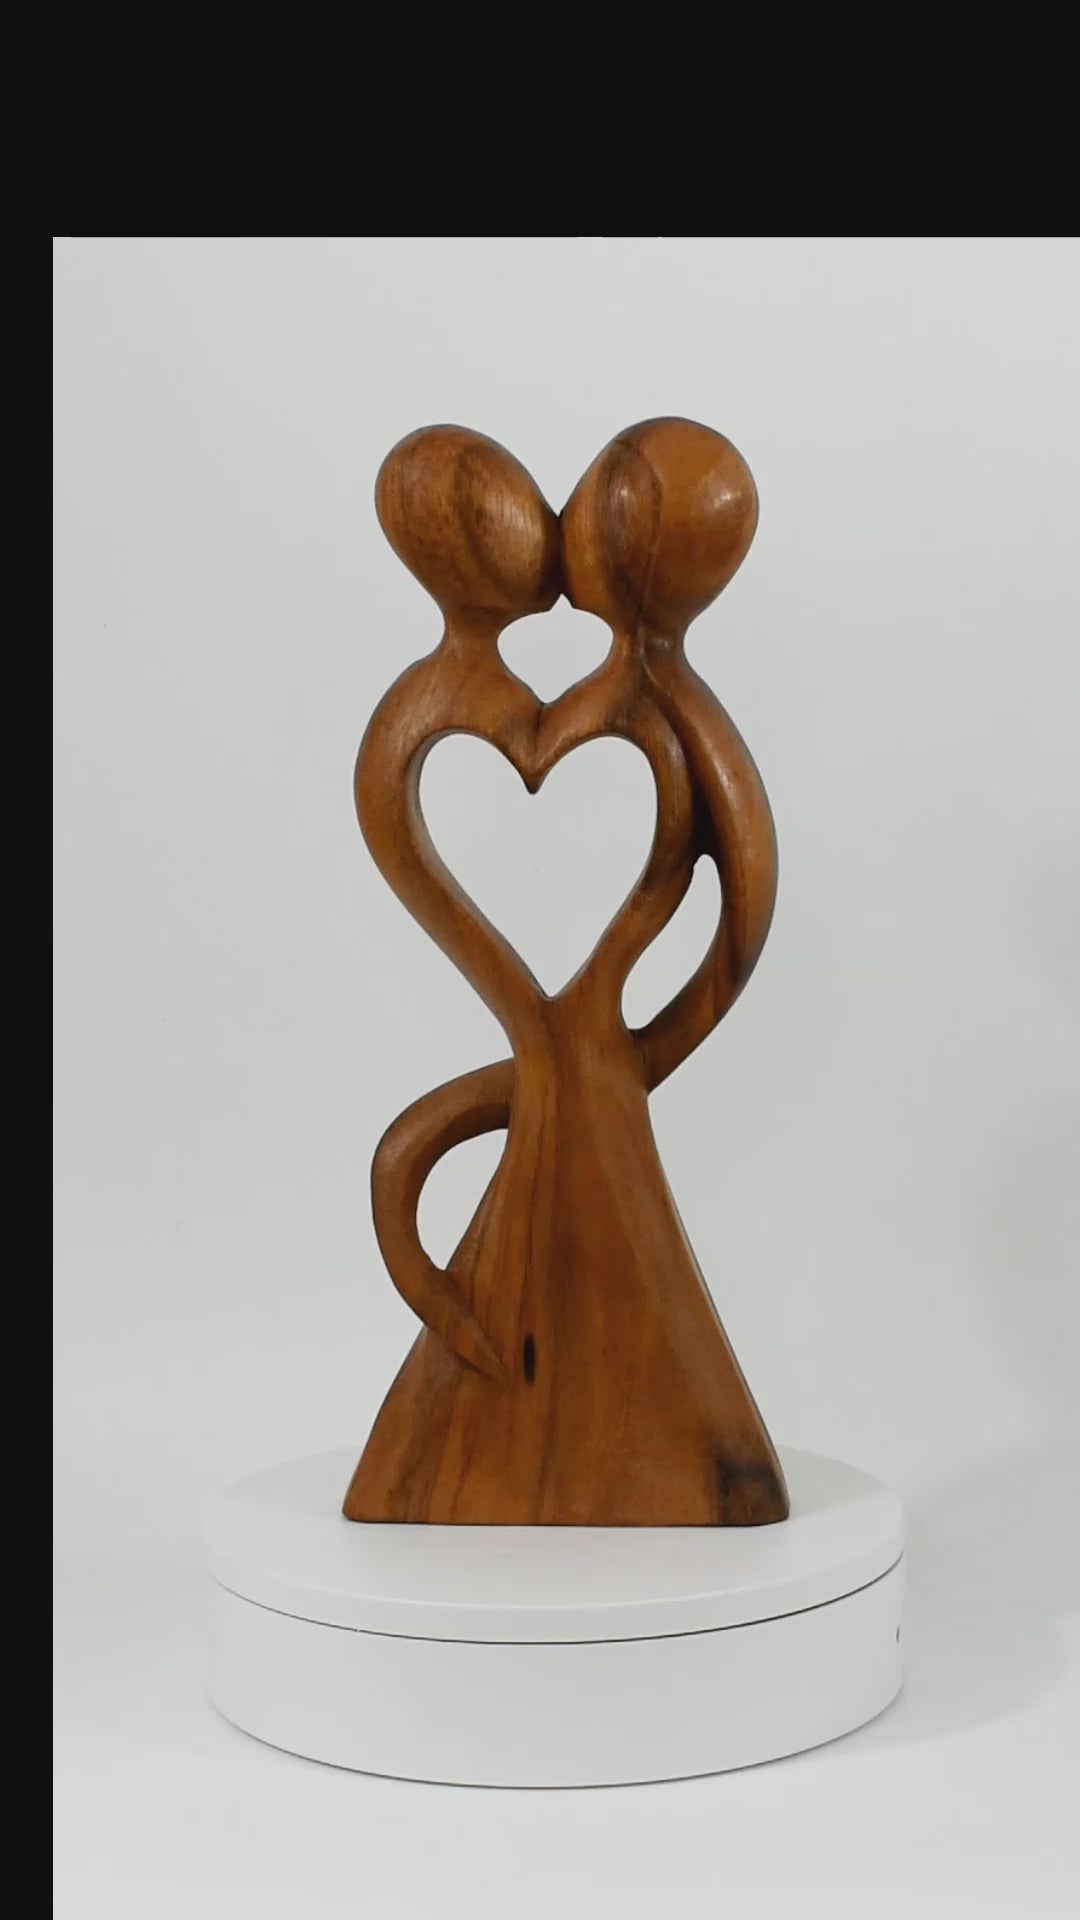 12" Wooden Handmade Abstract Sculpture Statue Handcrafted "Love of My Life" Gift Art Home Decor Figurine Accent Artwork Hand Carved